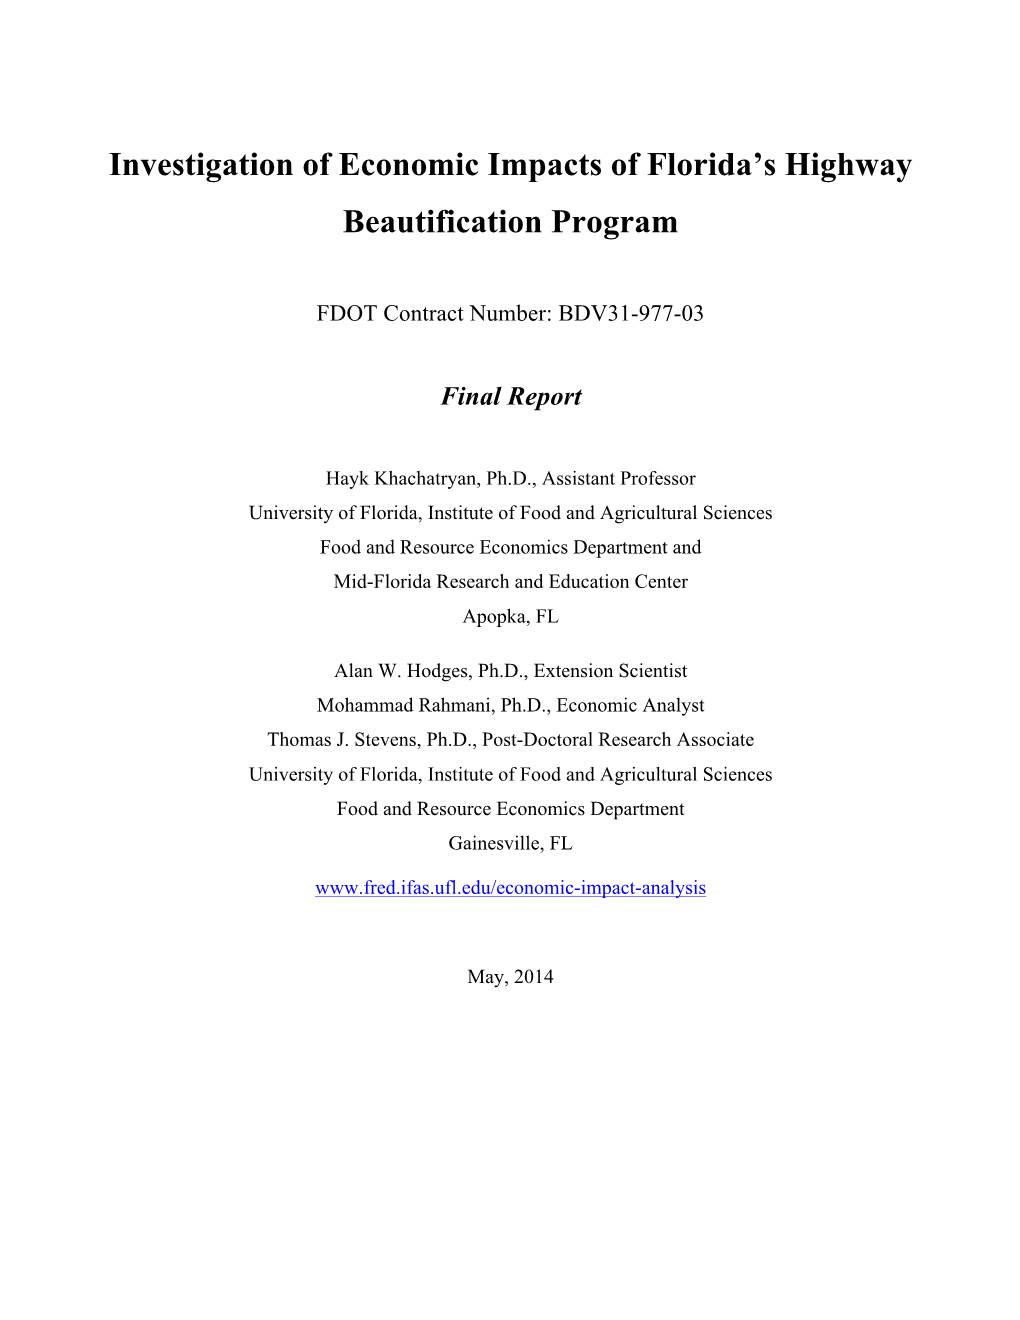 Investigation of Economic Impacts of Florida's Highway Beautification